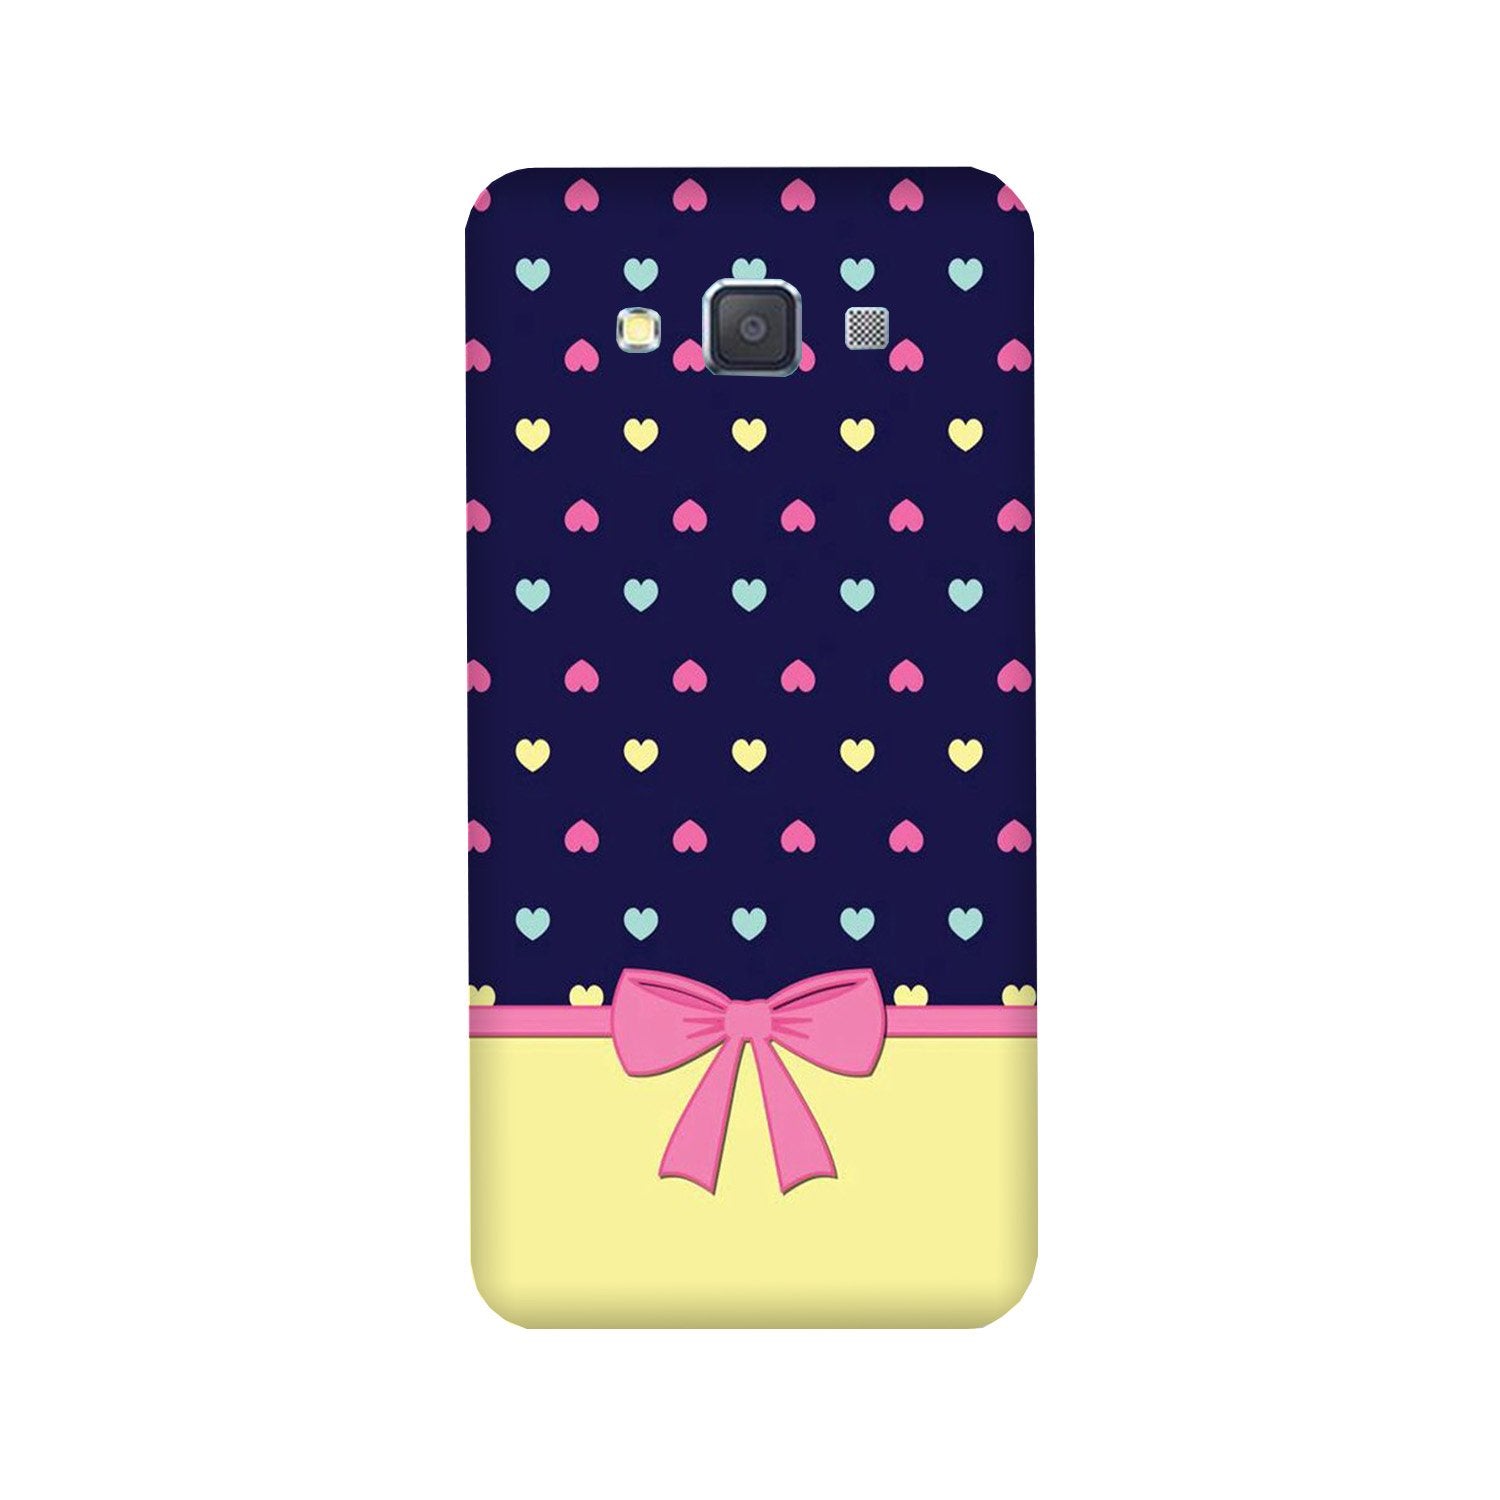 Gift Wrap5 Case for Galaxy J5 (2016)